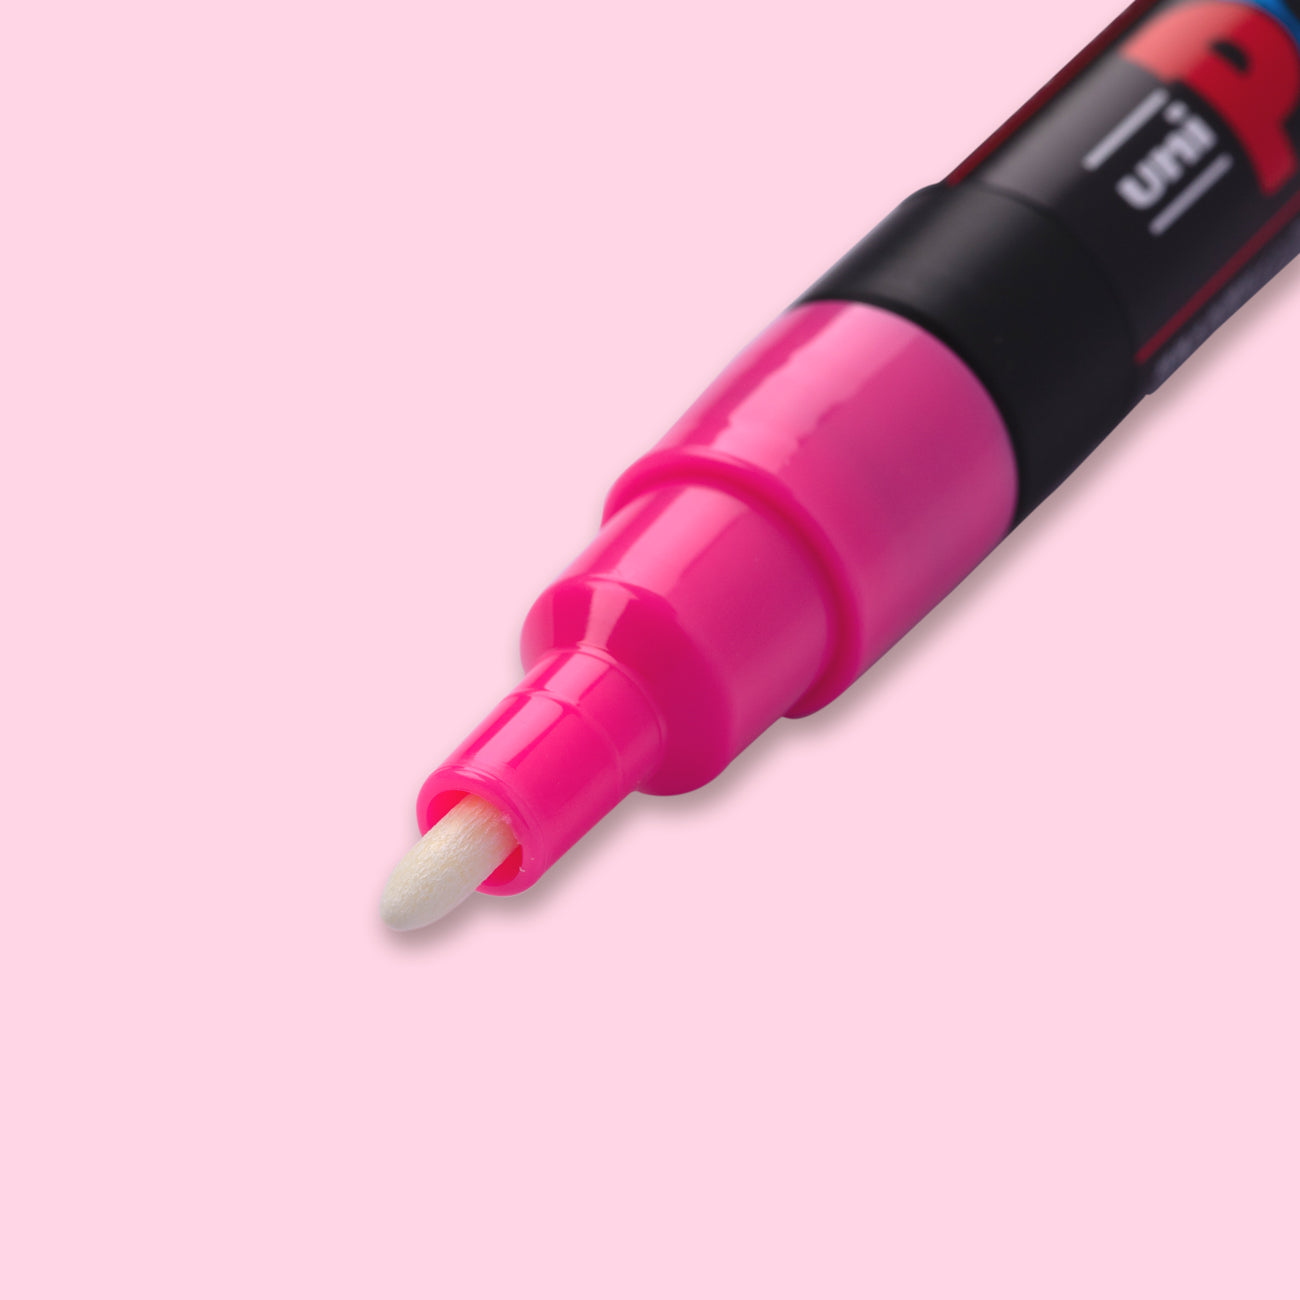 UNI-POSCA PAINT MARKER PC-1M Coral Pink #66 – A Work of Heart